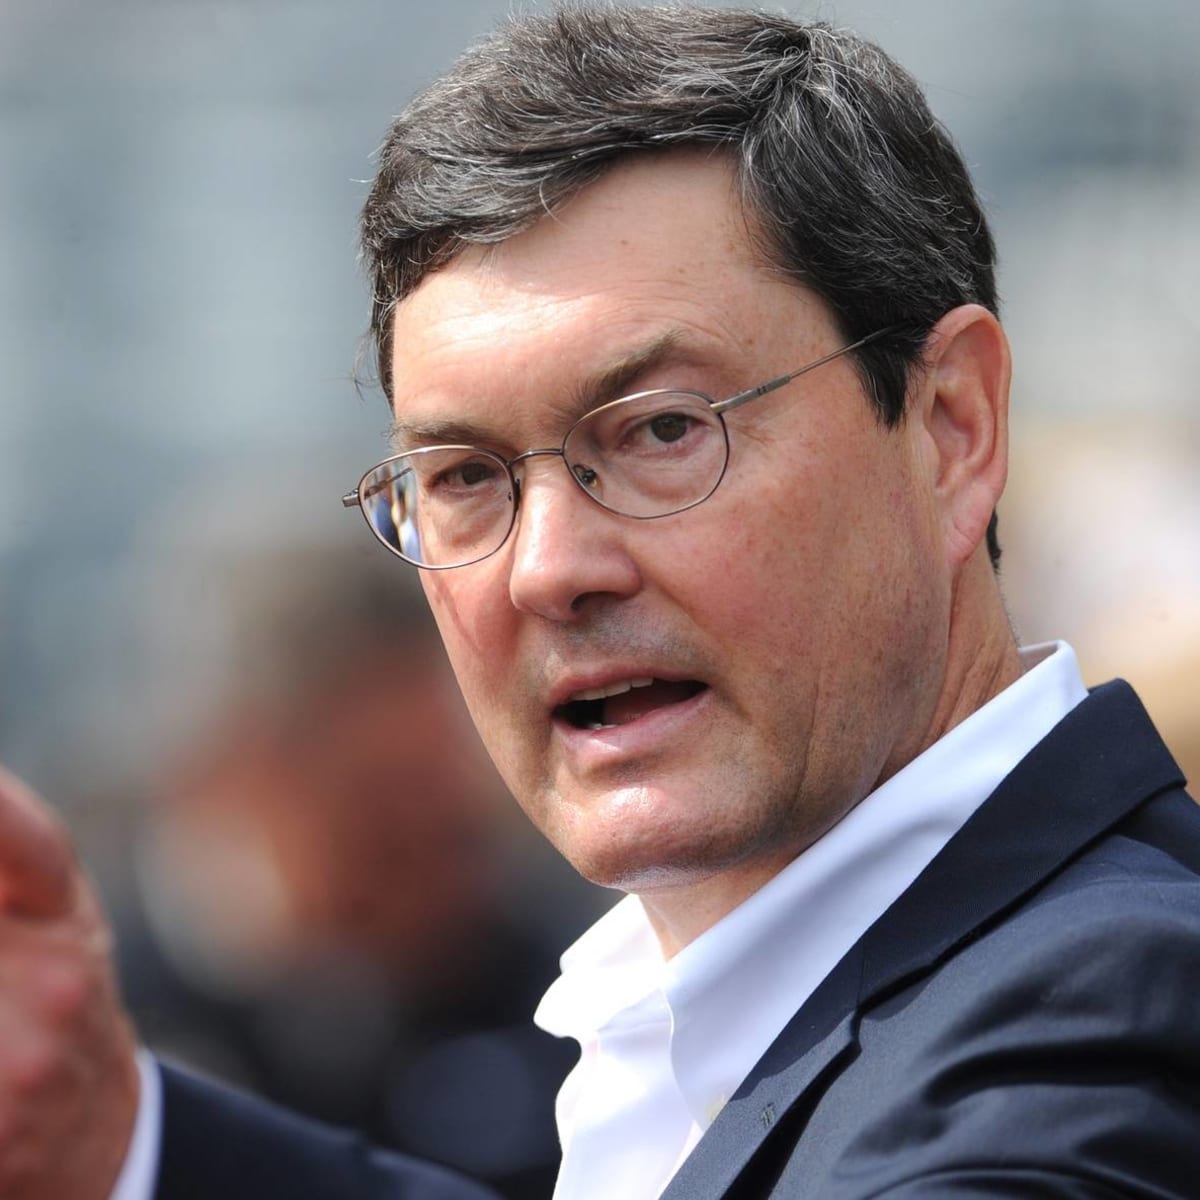 Bob Nutting poses for picture with fan wearing “sell the team